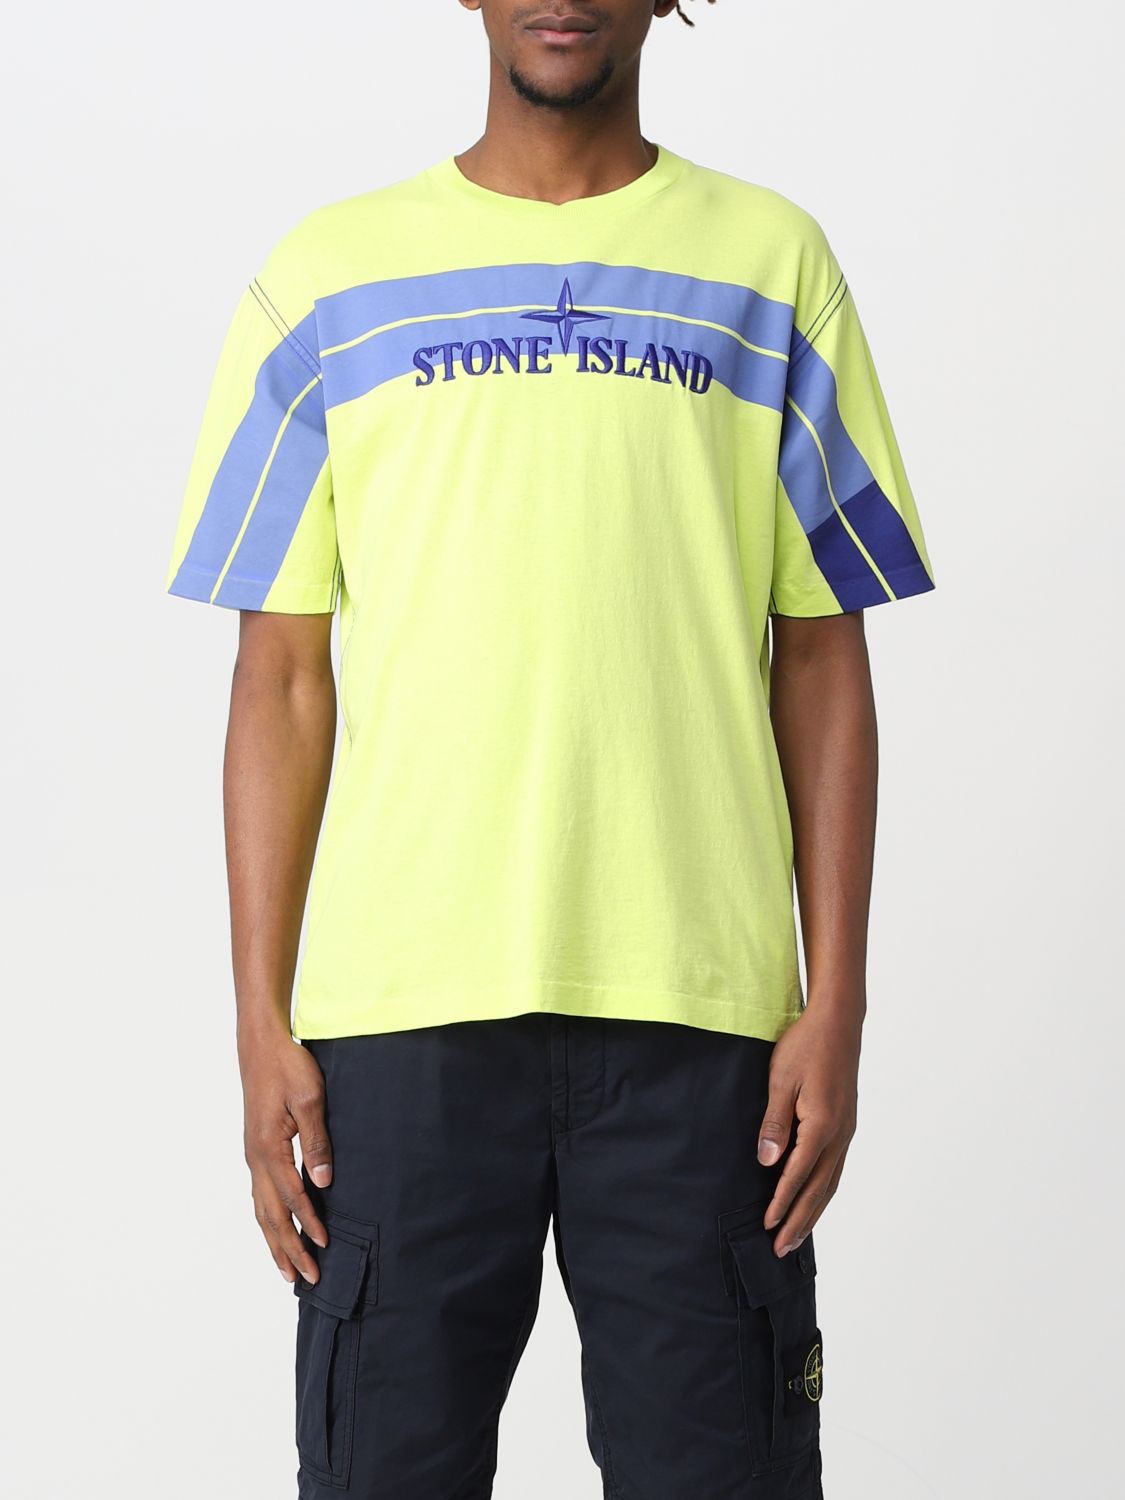 STONE ISLAND: Inverse Stripe Three T-shirt with embroidered logo ...